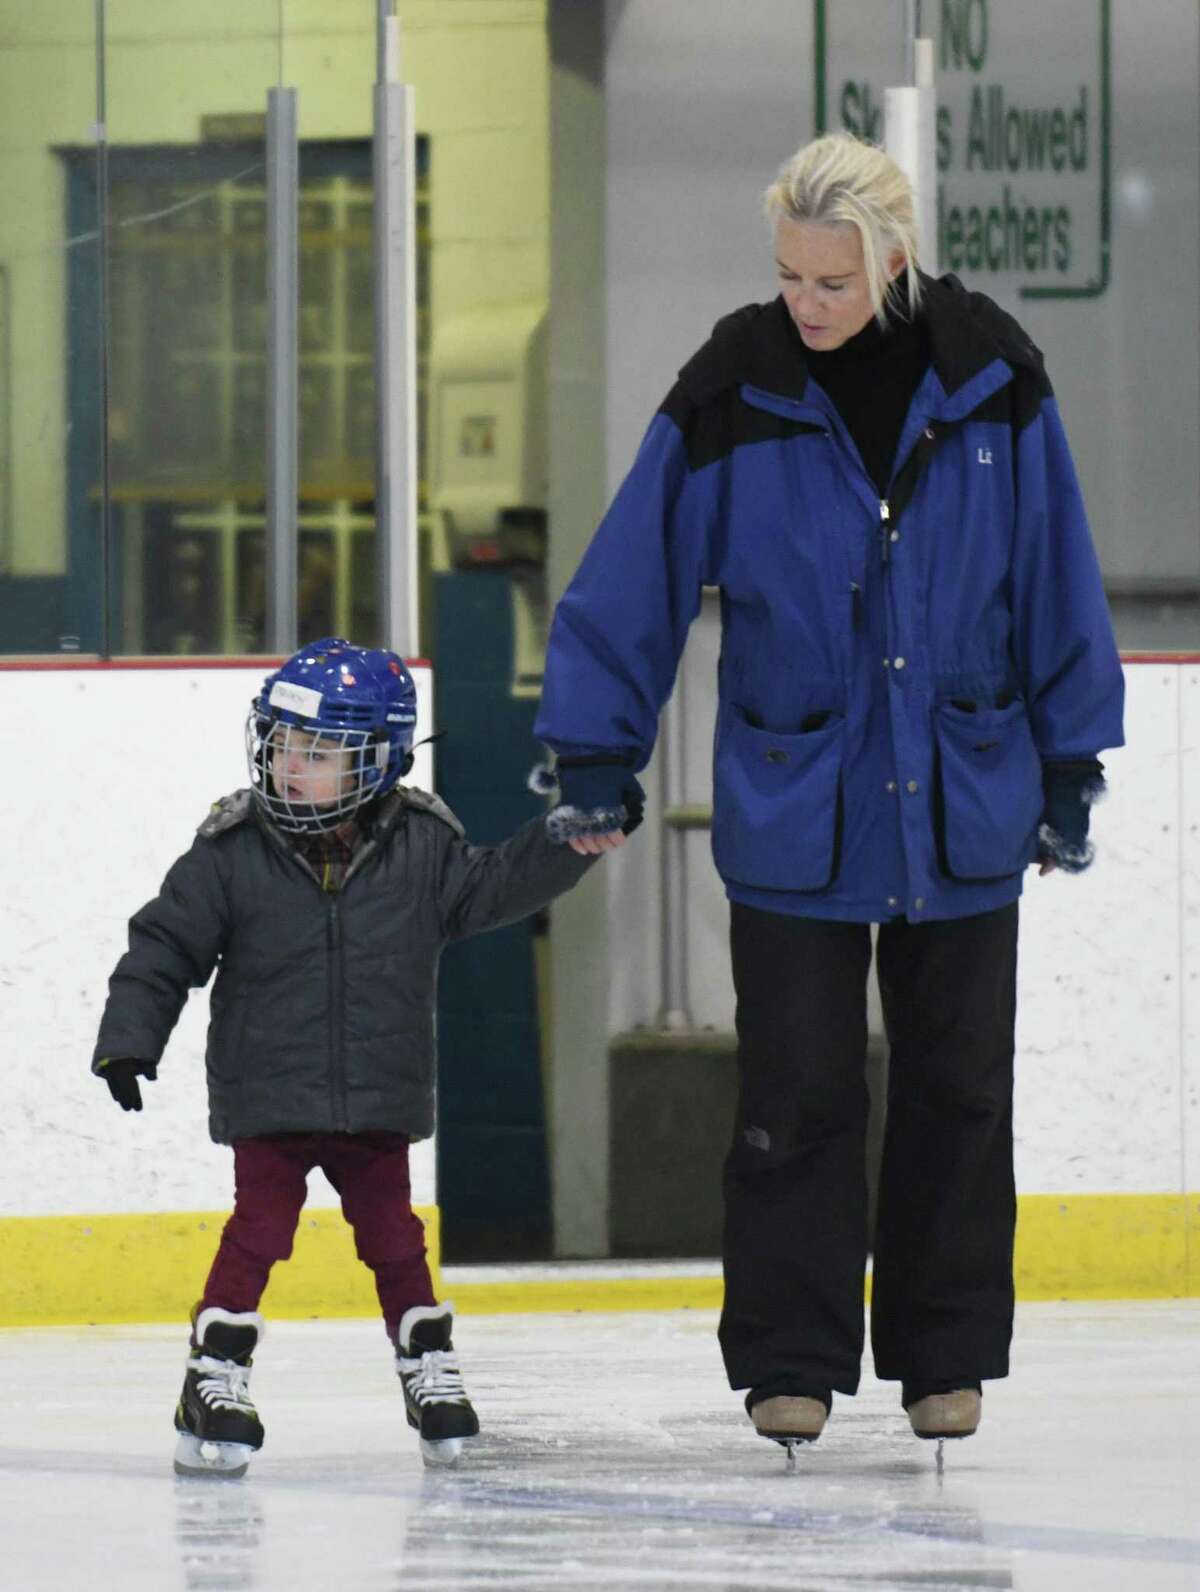 Greenwich's Brody Neri, 4, gets a skating lesson from Liz Leamy at Dorothy Hamill Skating Rink in the Byram section of Greenwich, Conn. Thursday, March 3, 2022.